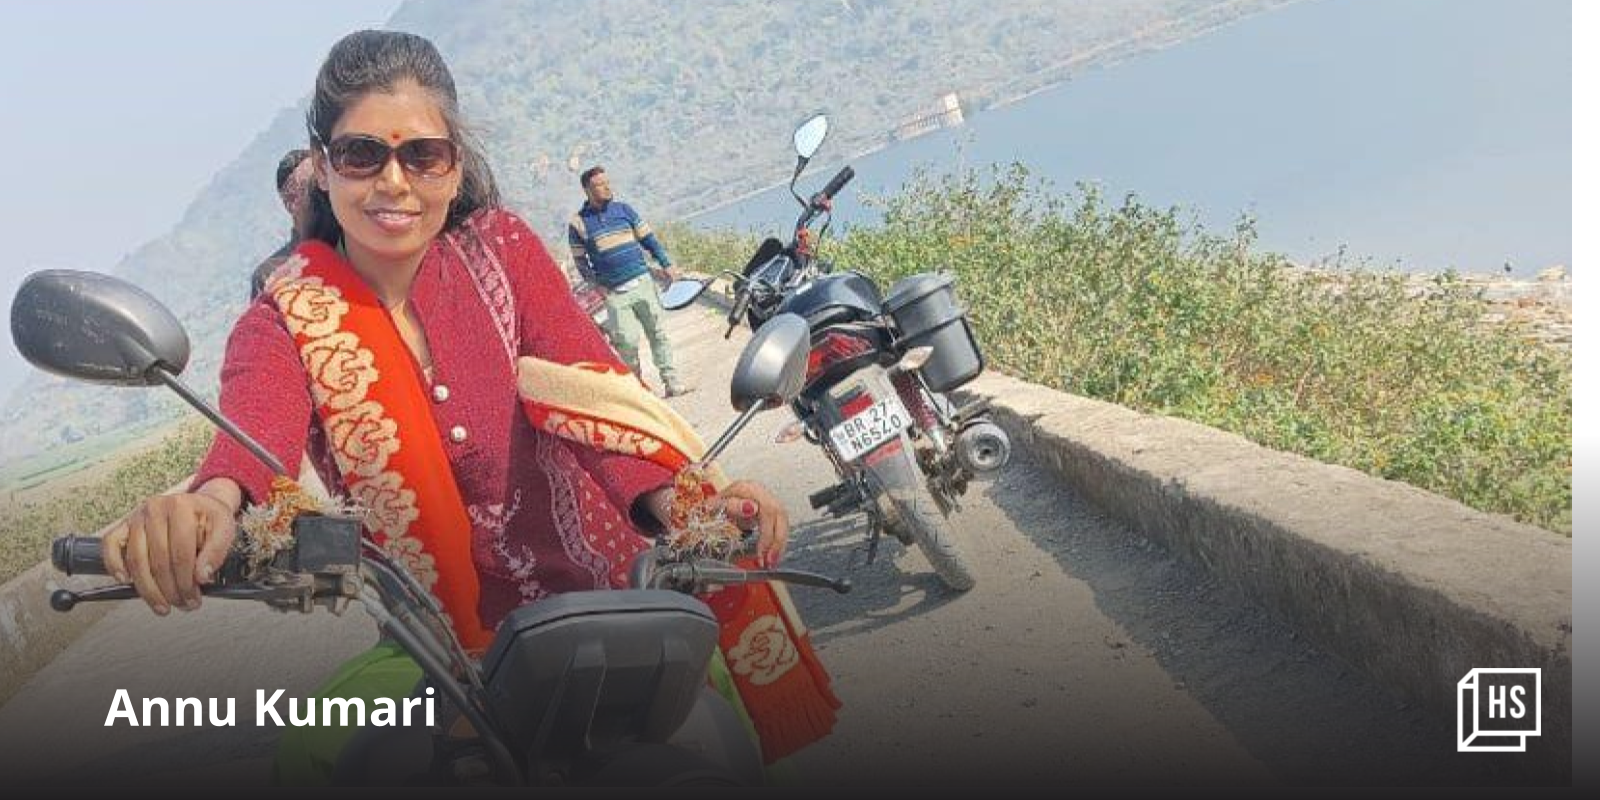 From youth champion to policewoman, how Annu Kumari is inspiring other girls in a remote Bihar village

